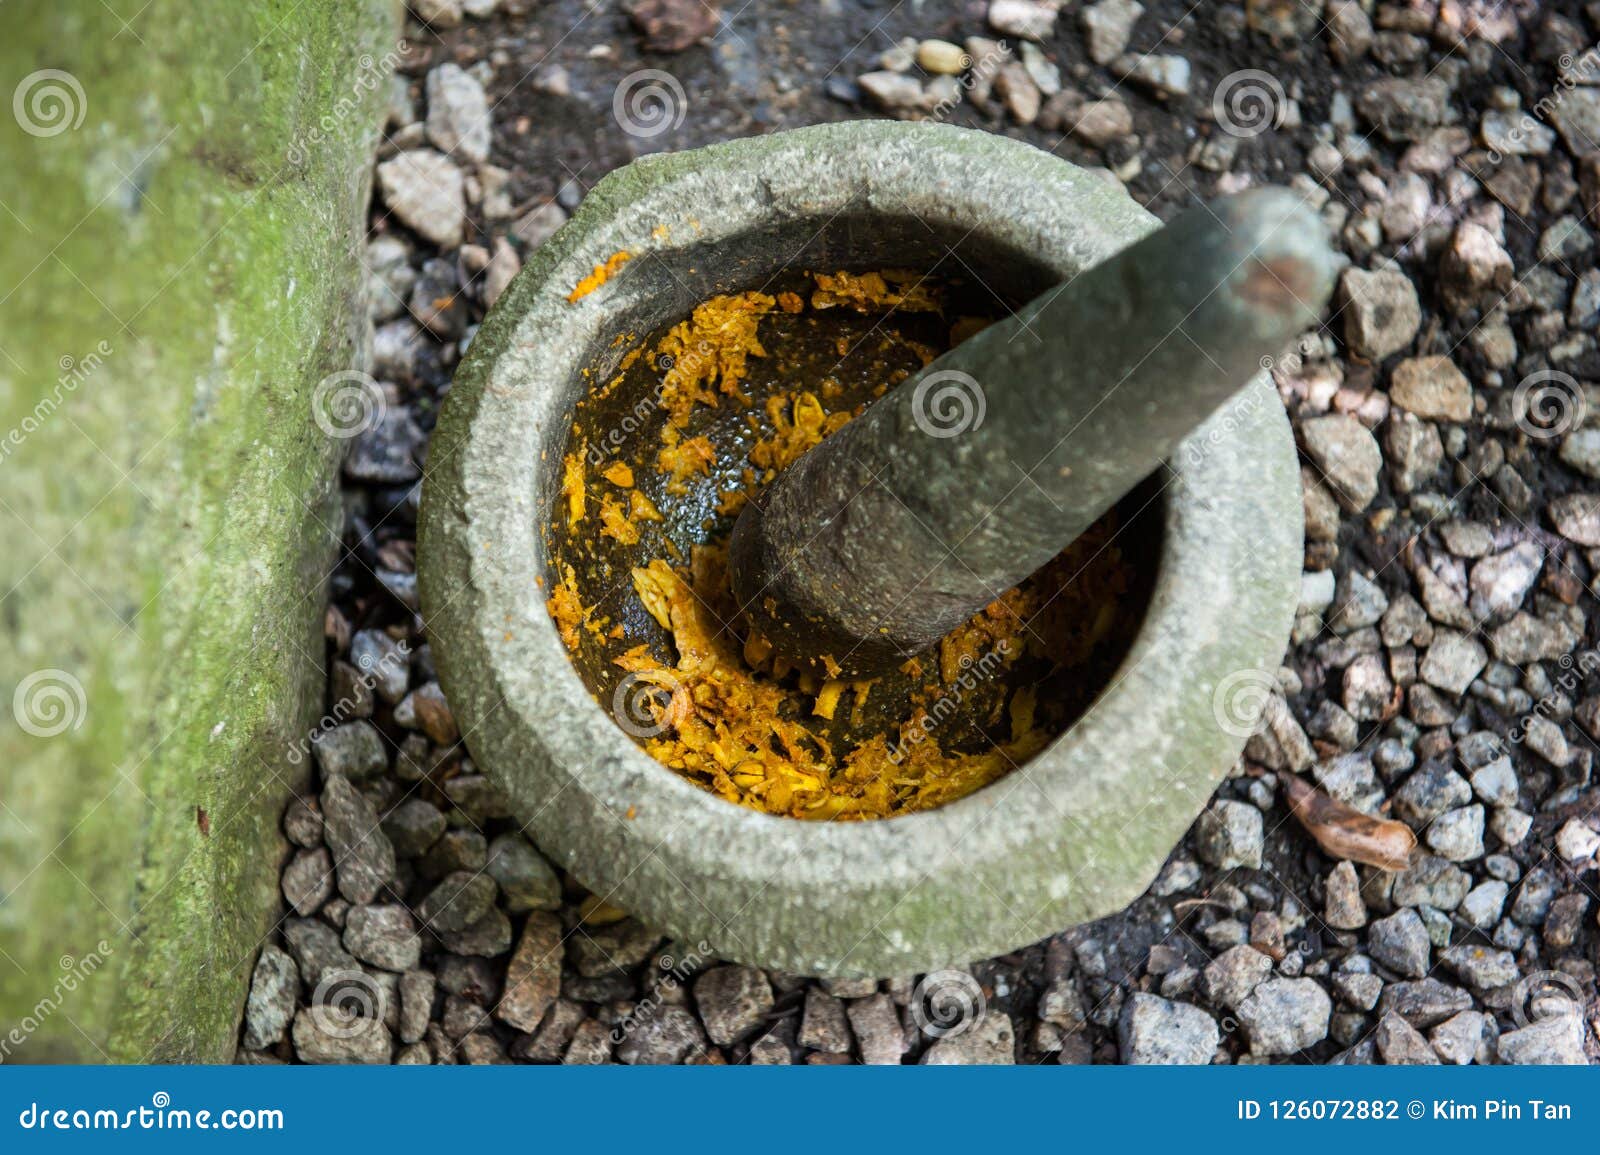 asian traditional ingredient grindstone